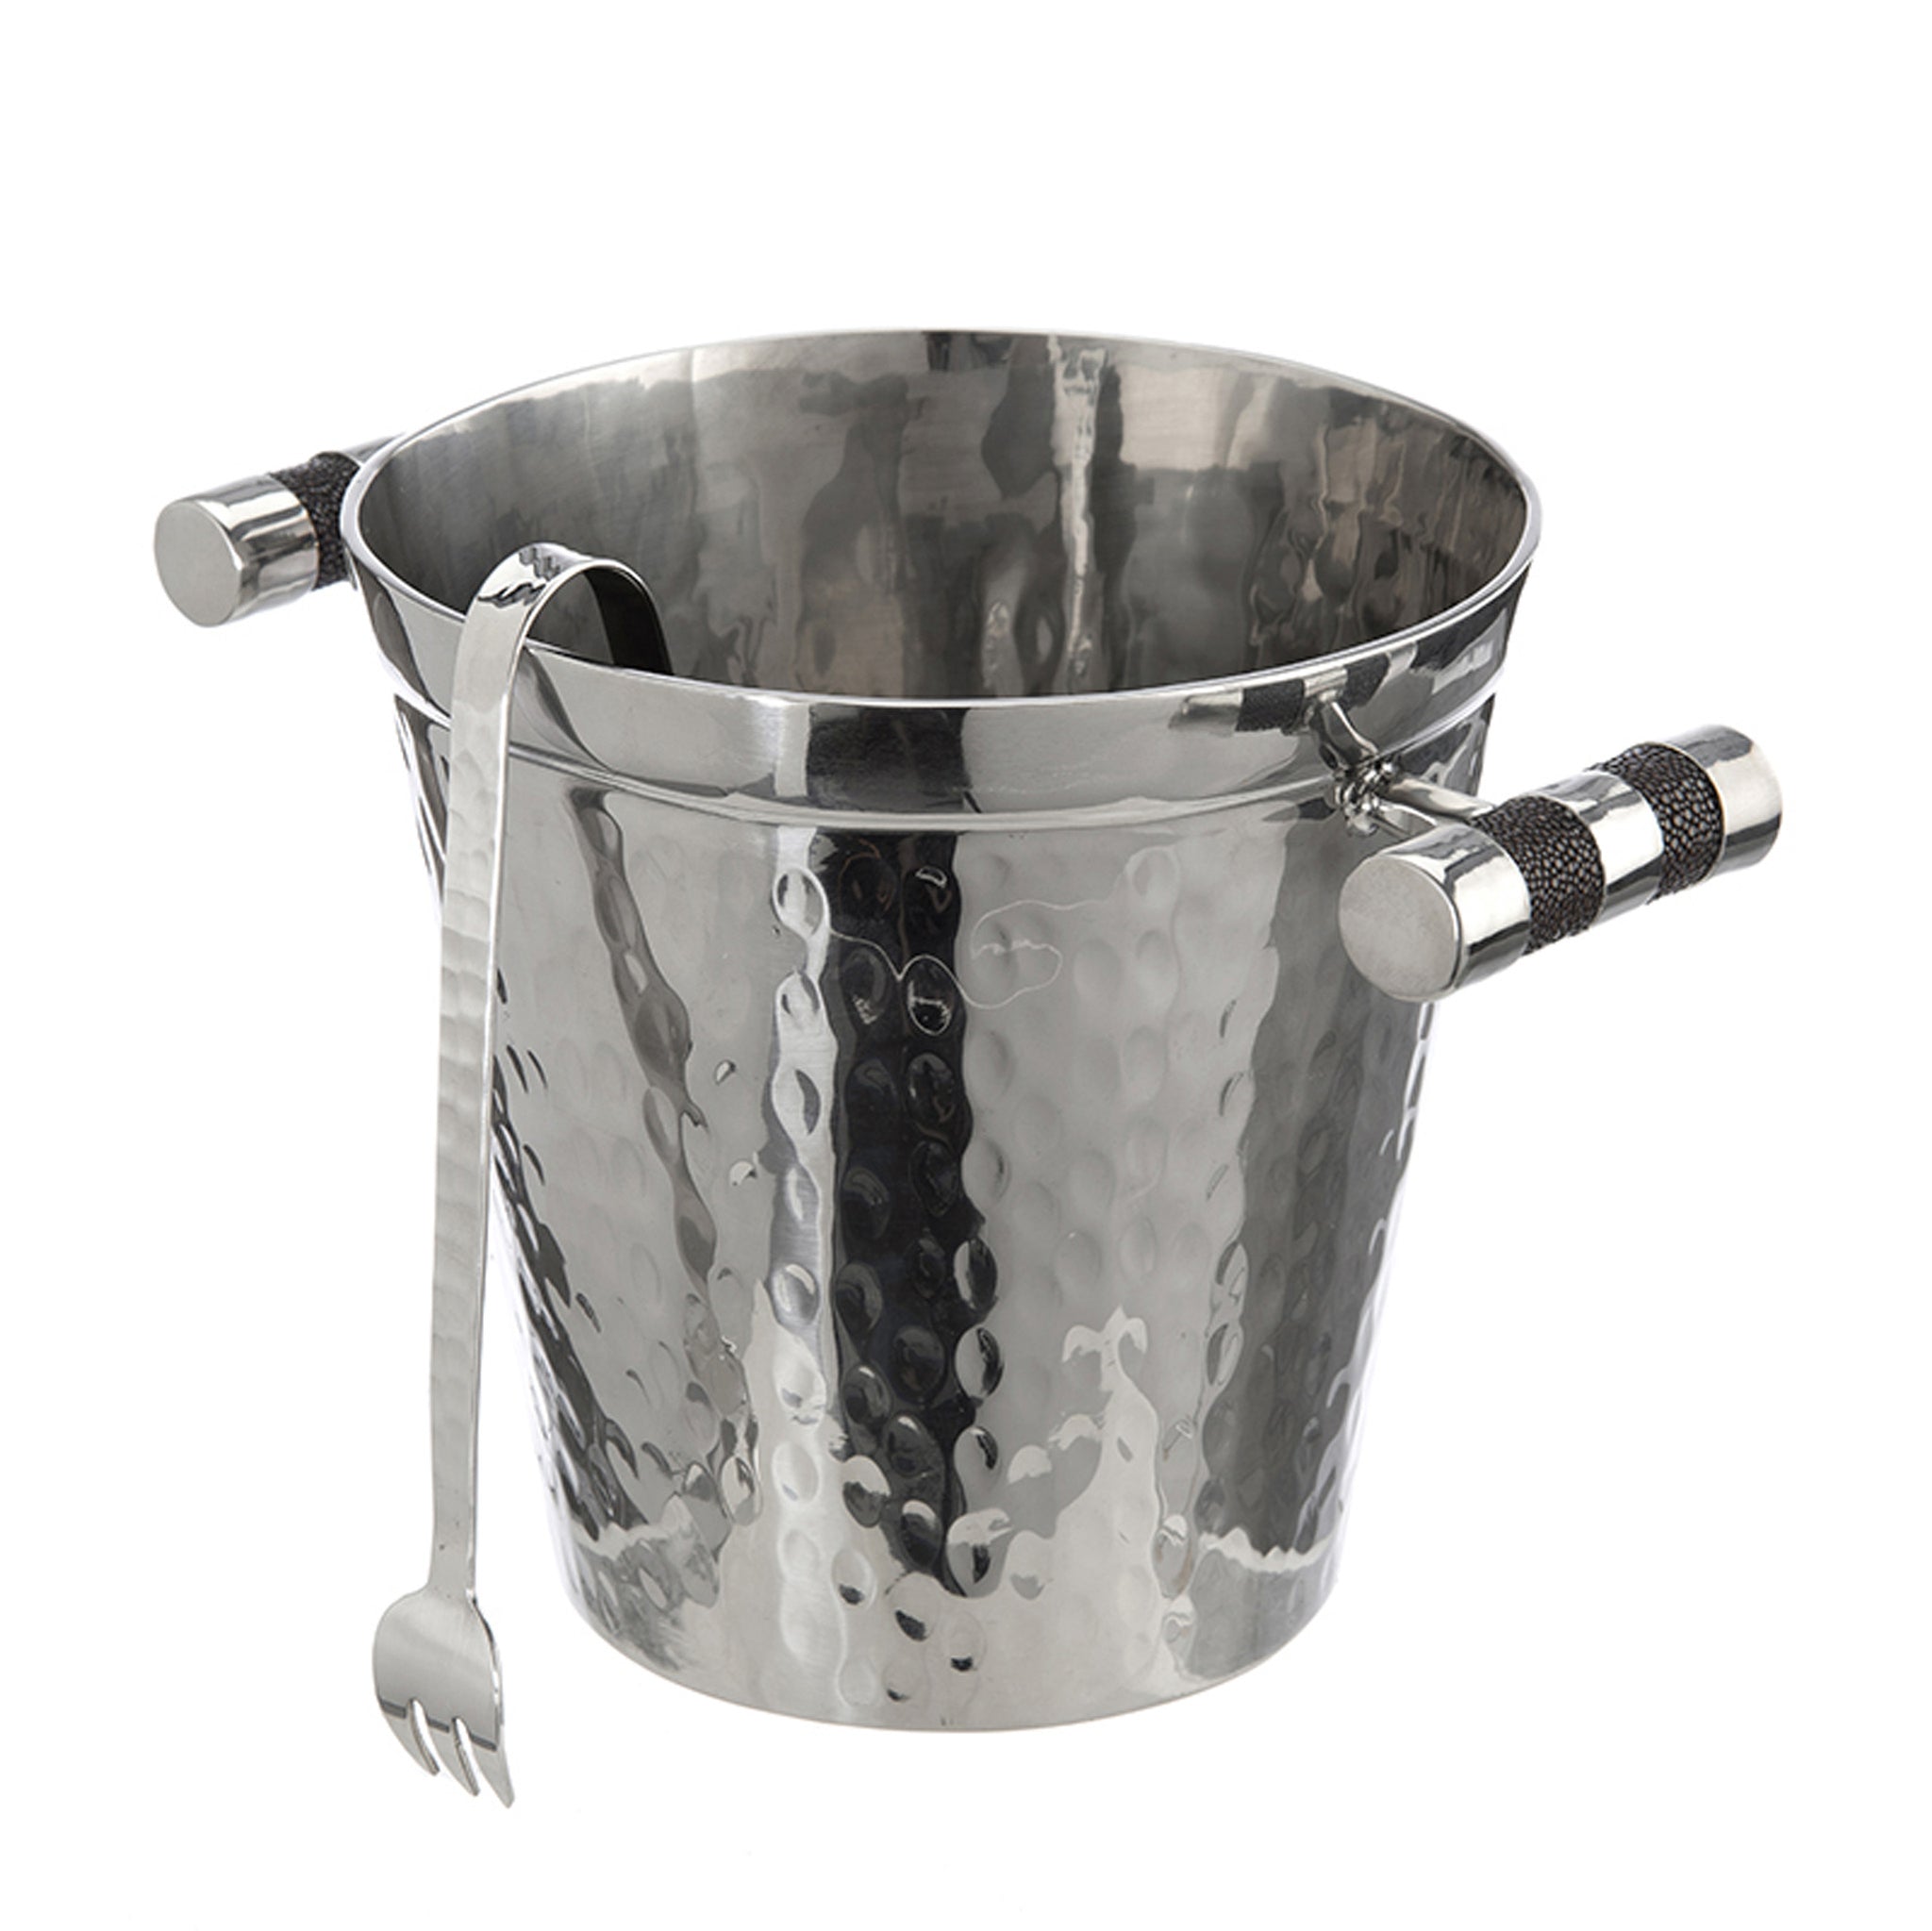 Hammered Stainless Steel Ice Bucket With Tongs